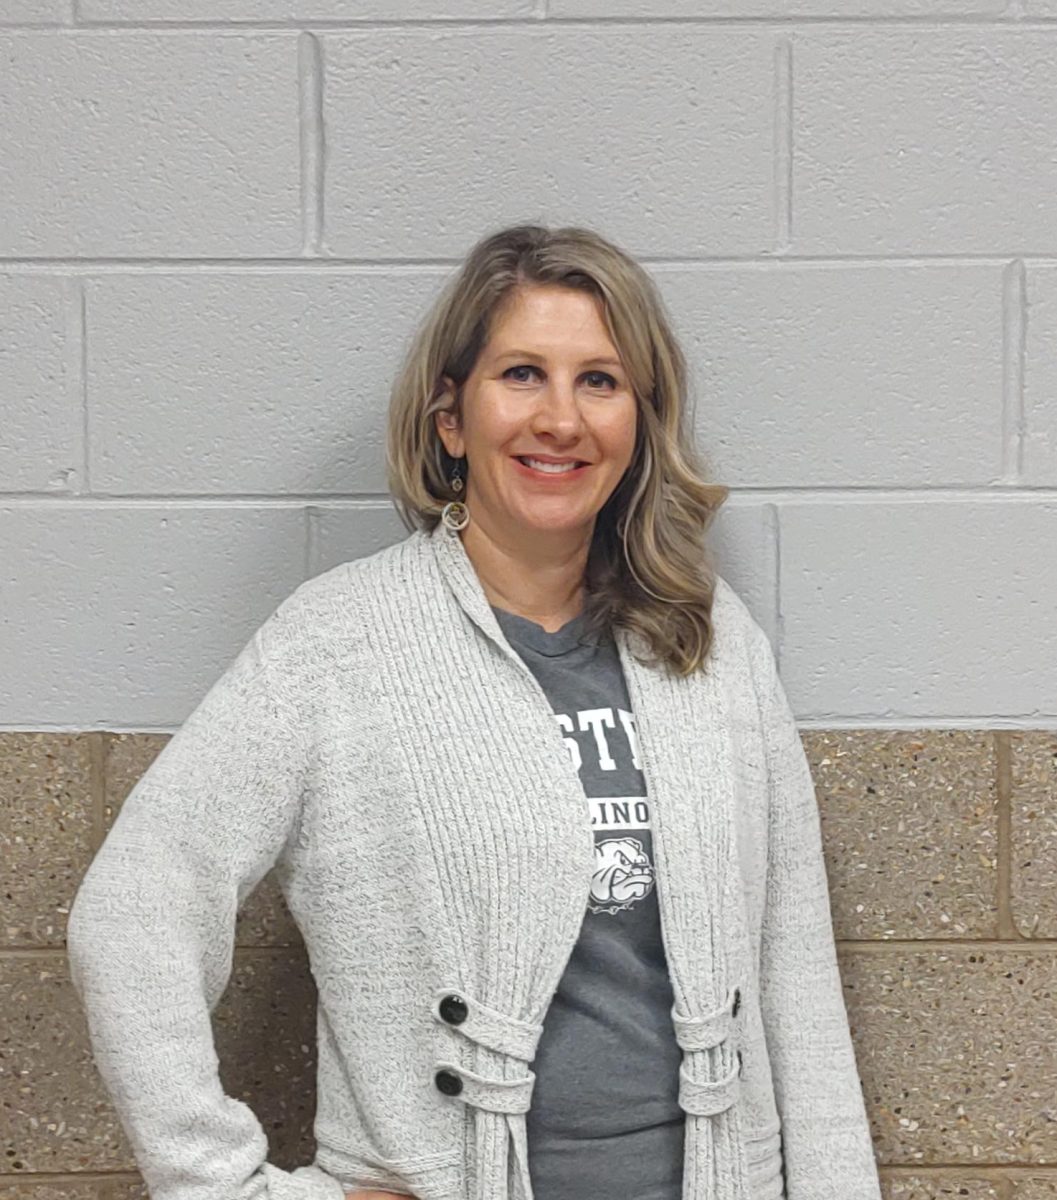 Pfeifer begins at North, making it her 15th year of teaching.